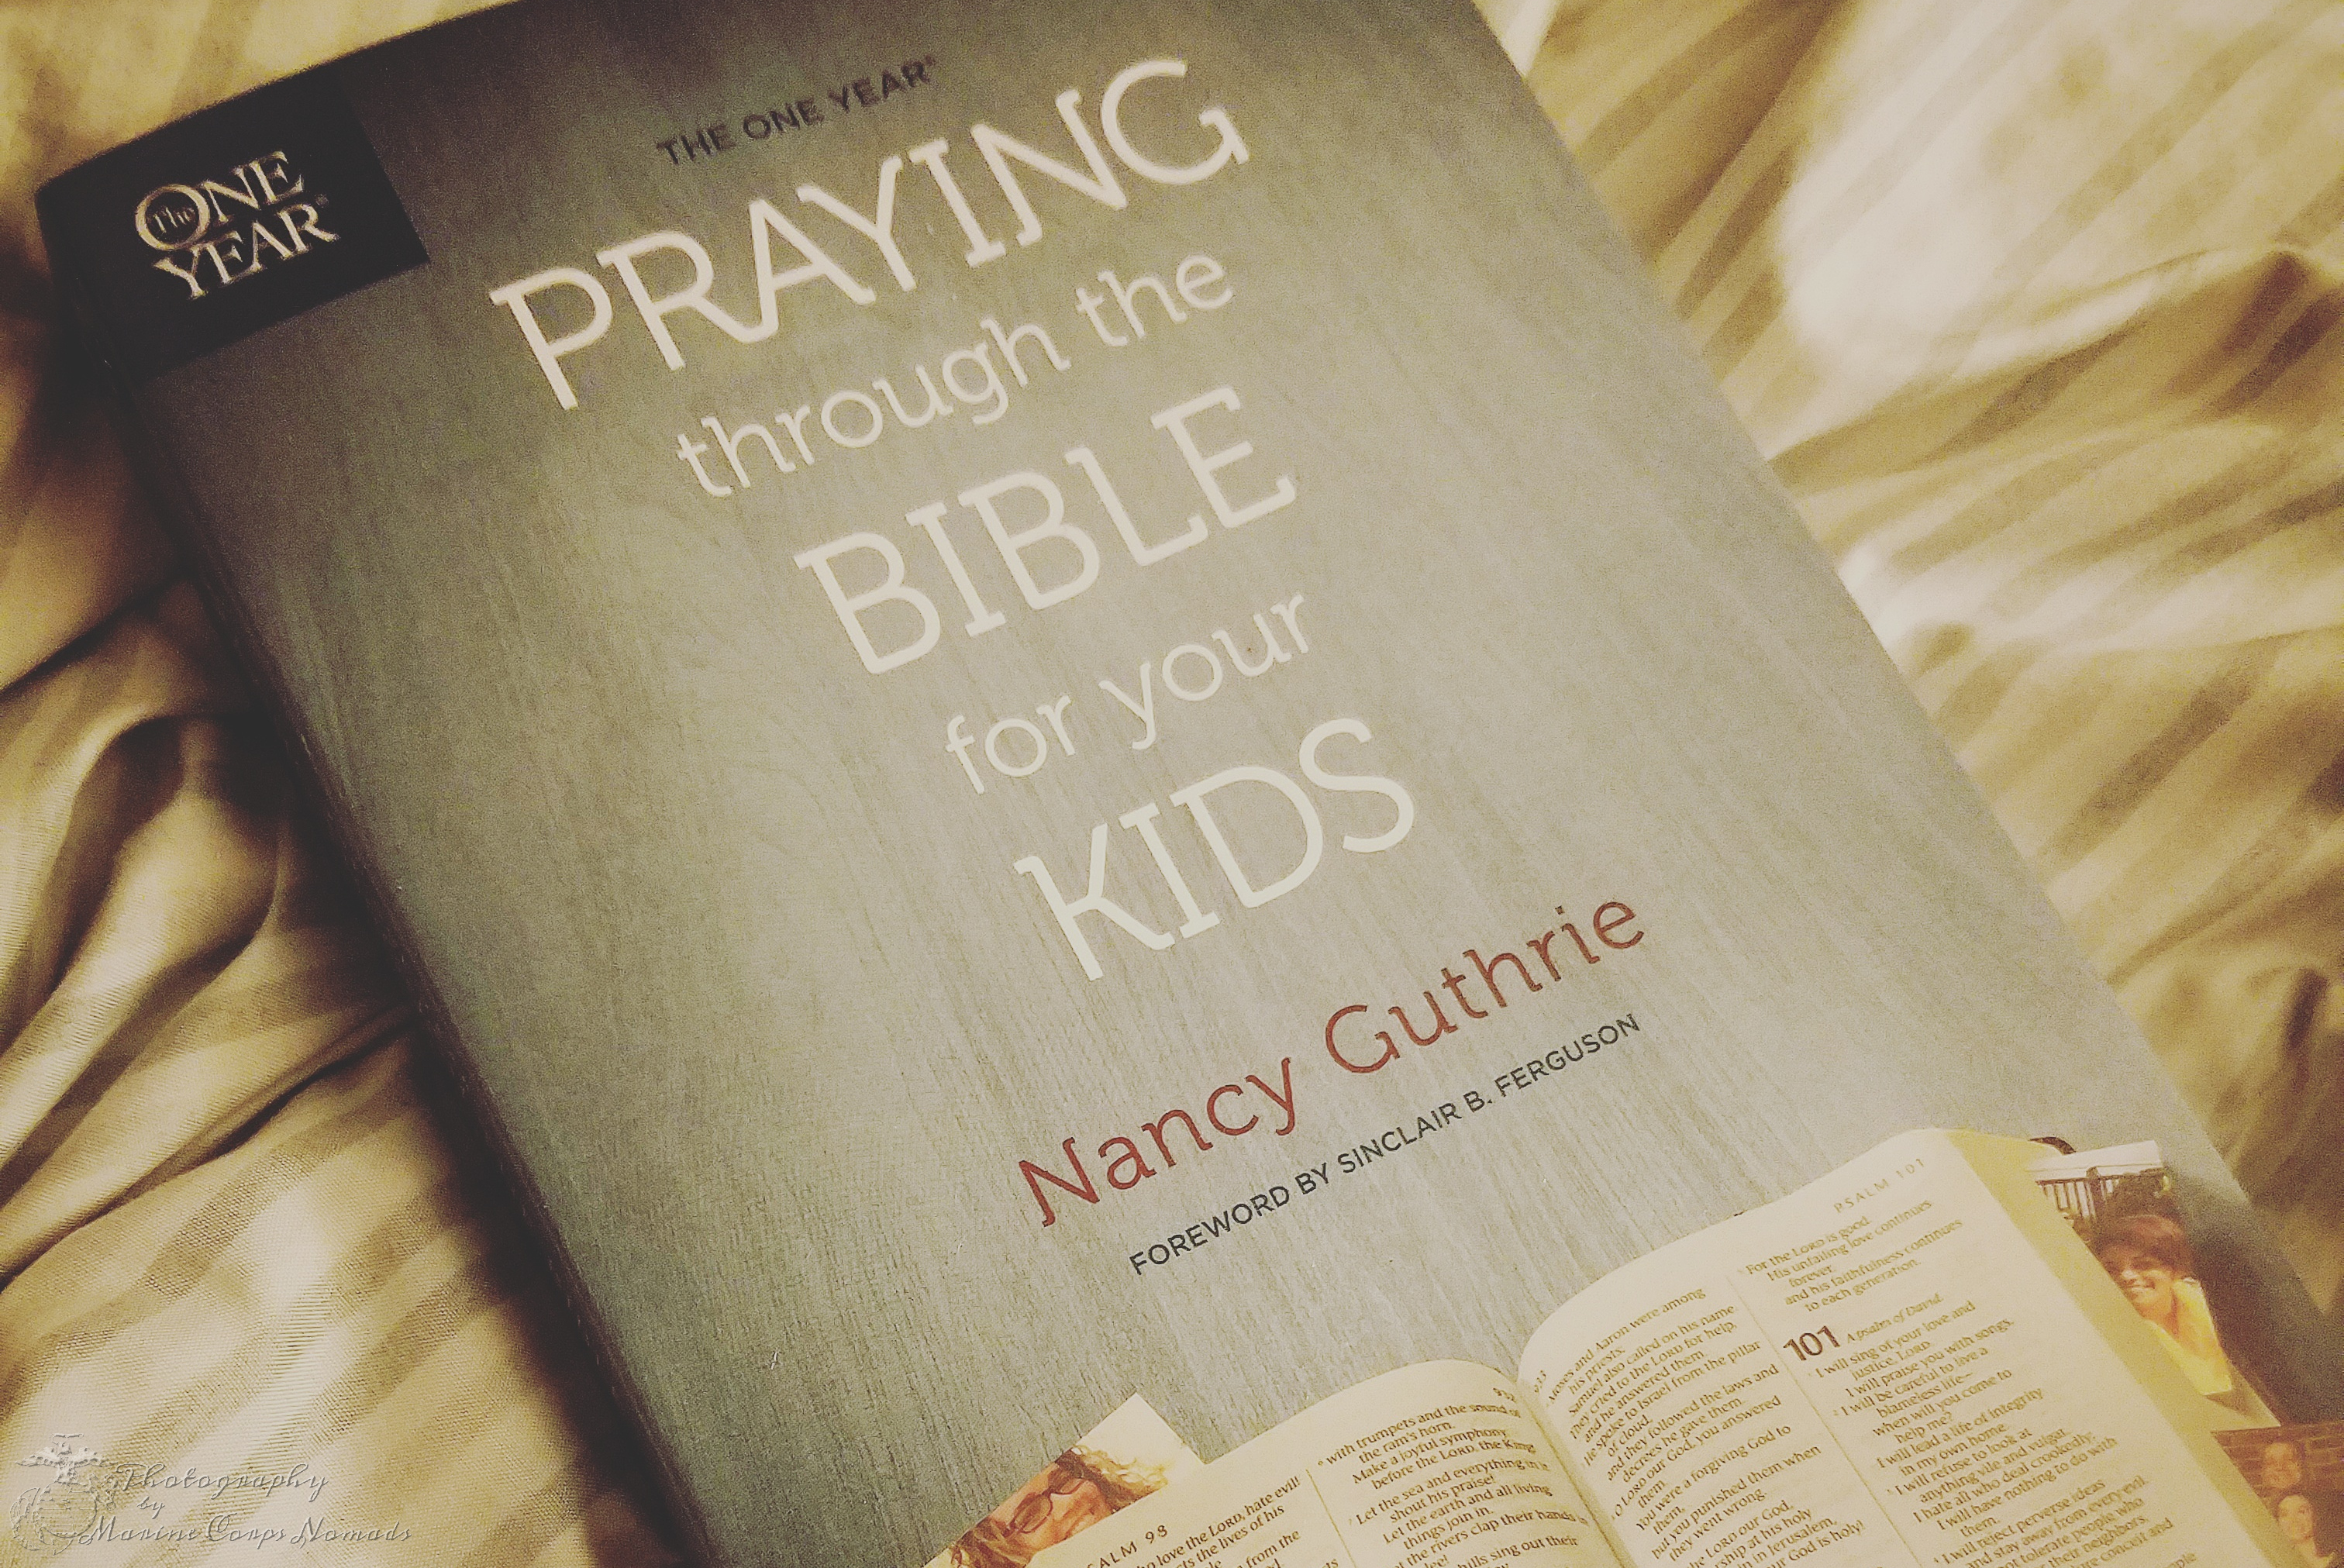 Praying through the Bible for your Kids